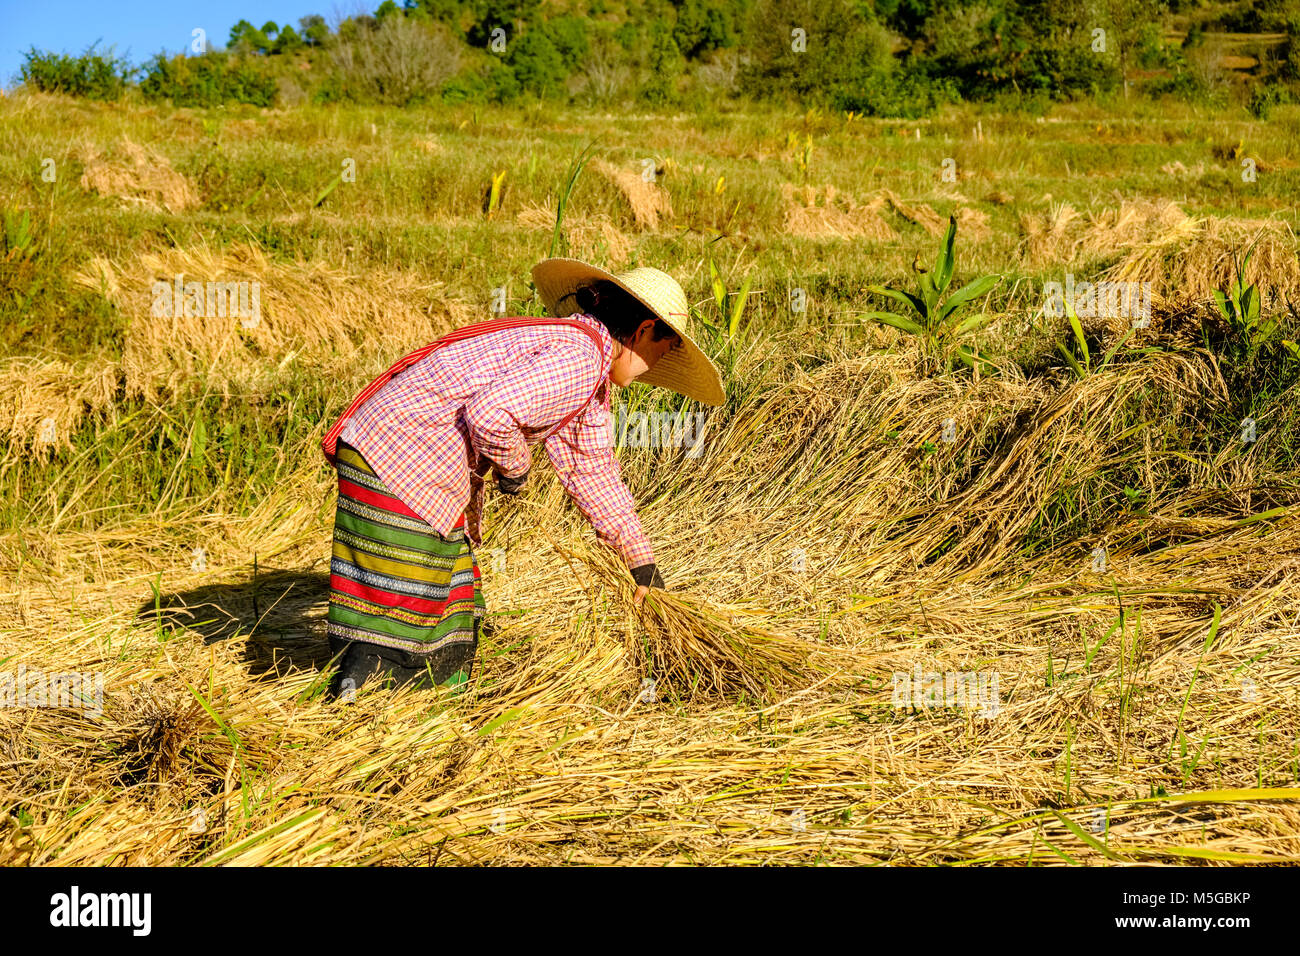 Rice is harvested by a woman on the fields in the hills of the tribal area in the traditional way Stock Photo